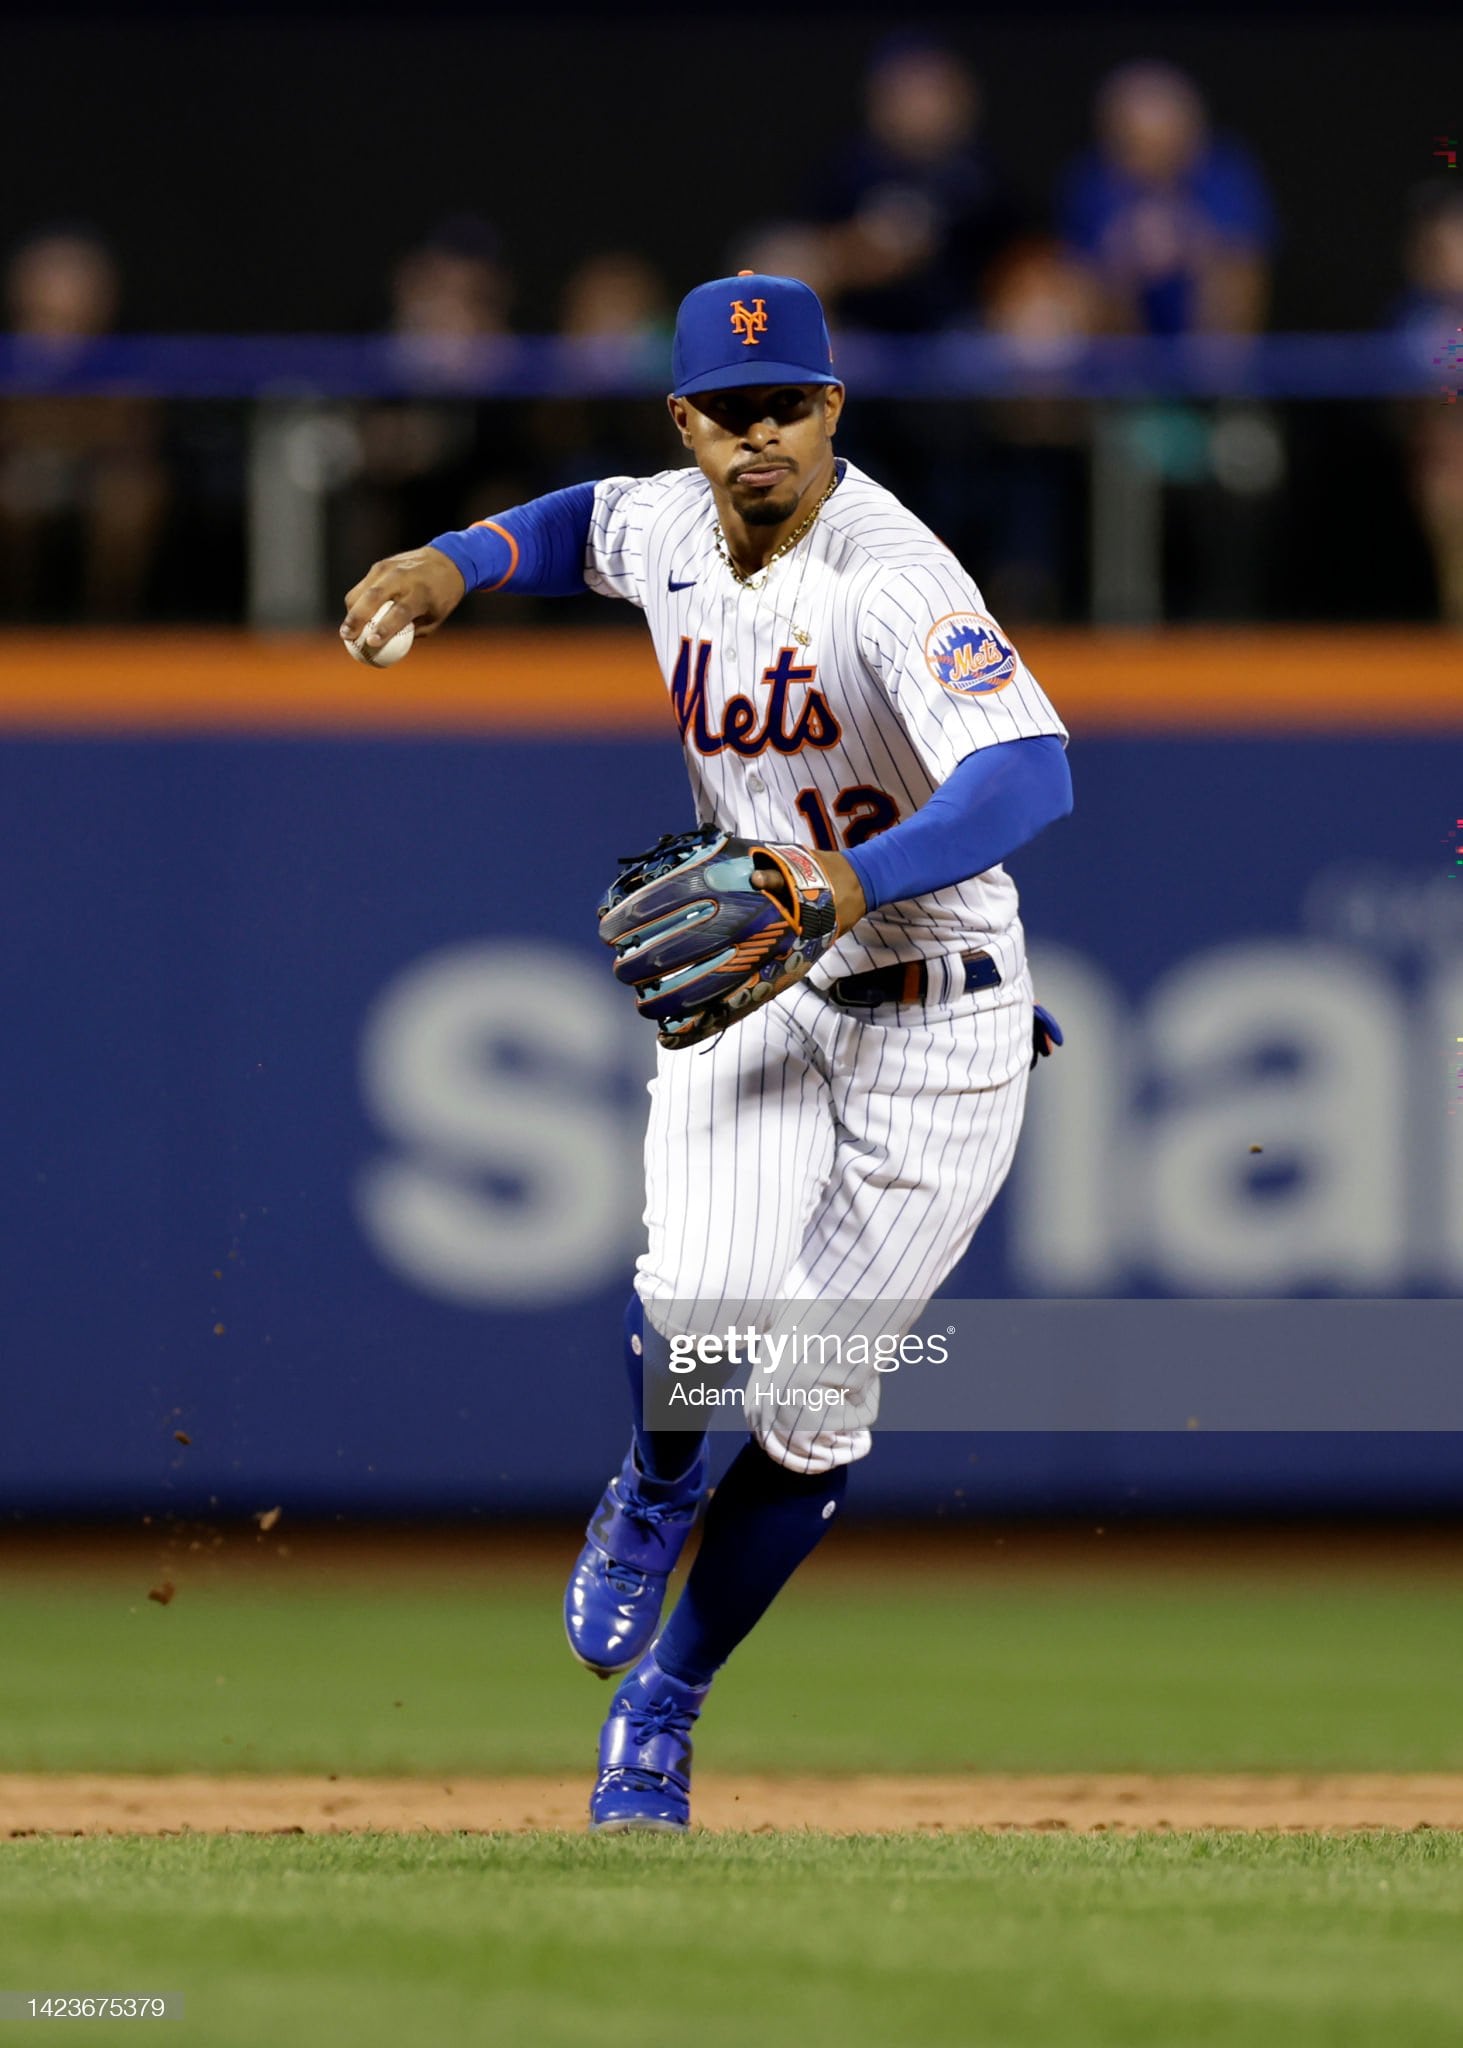 Francisco Lindor one of the best New York Mets shortstops of all time